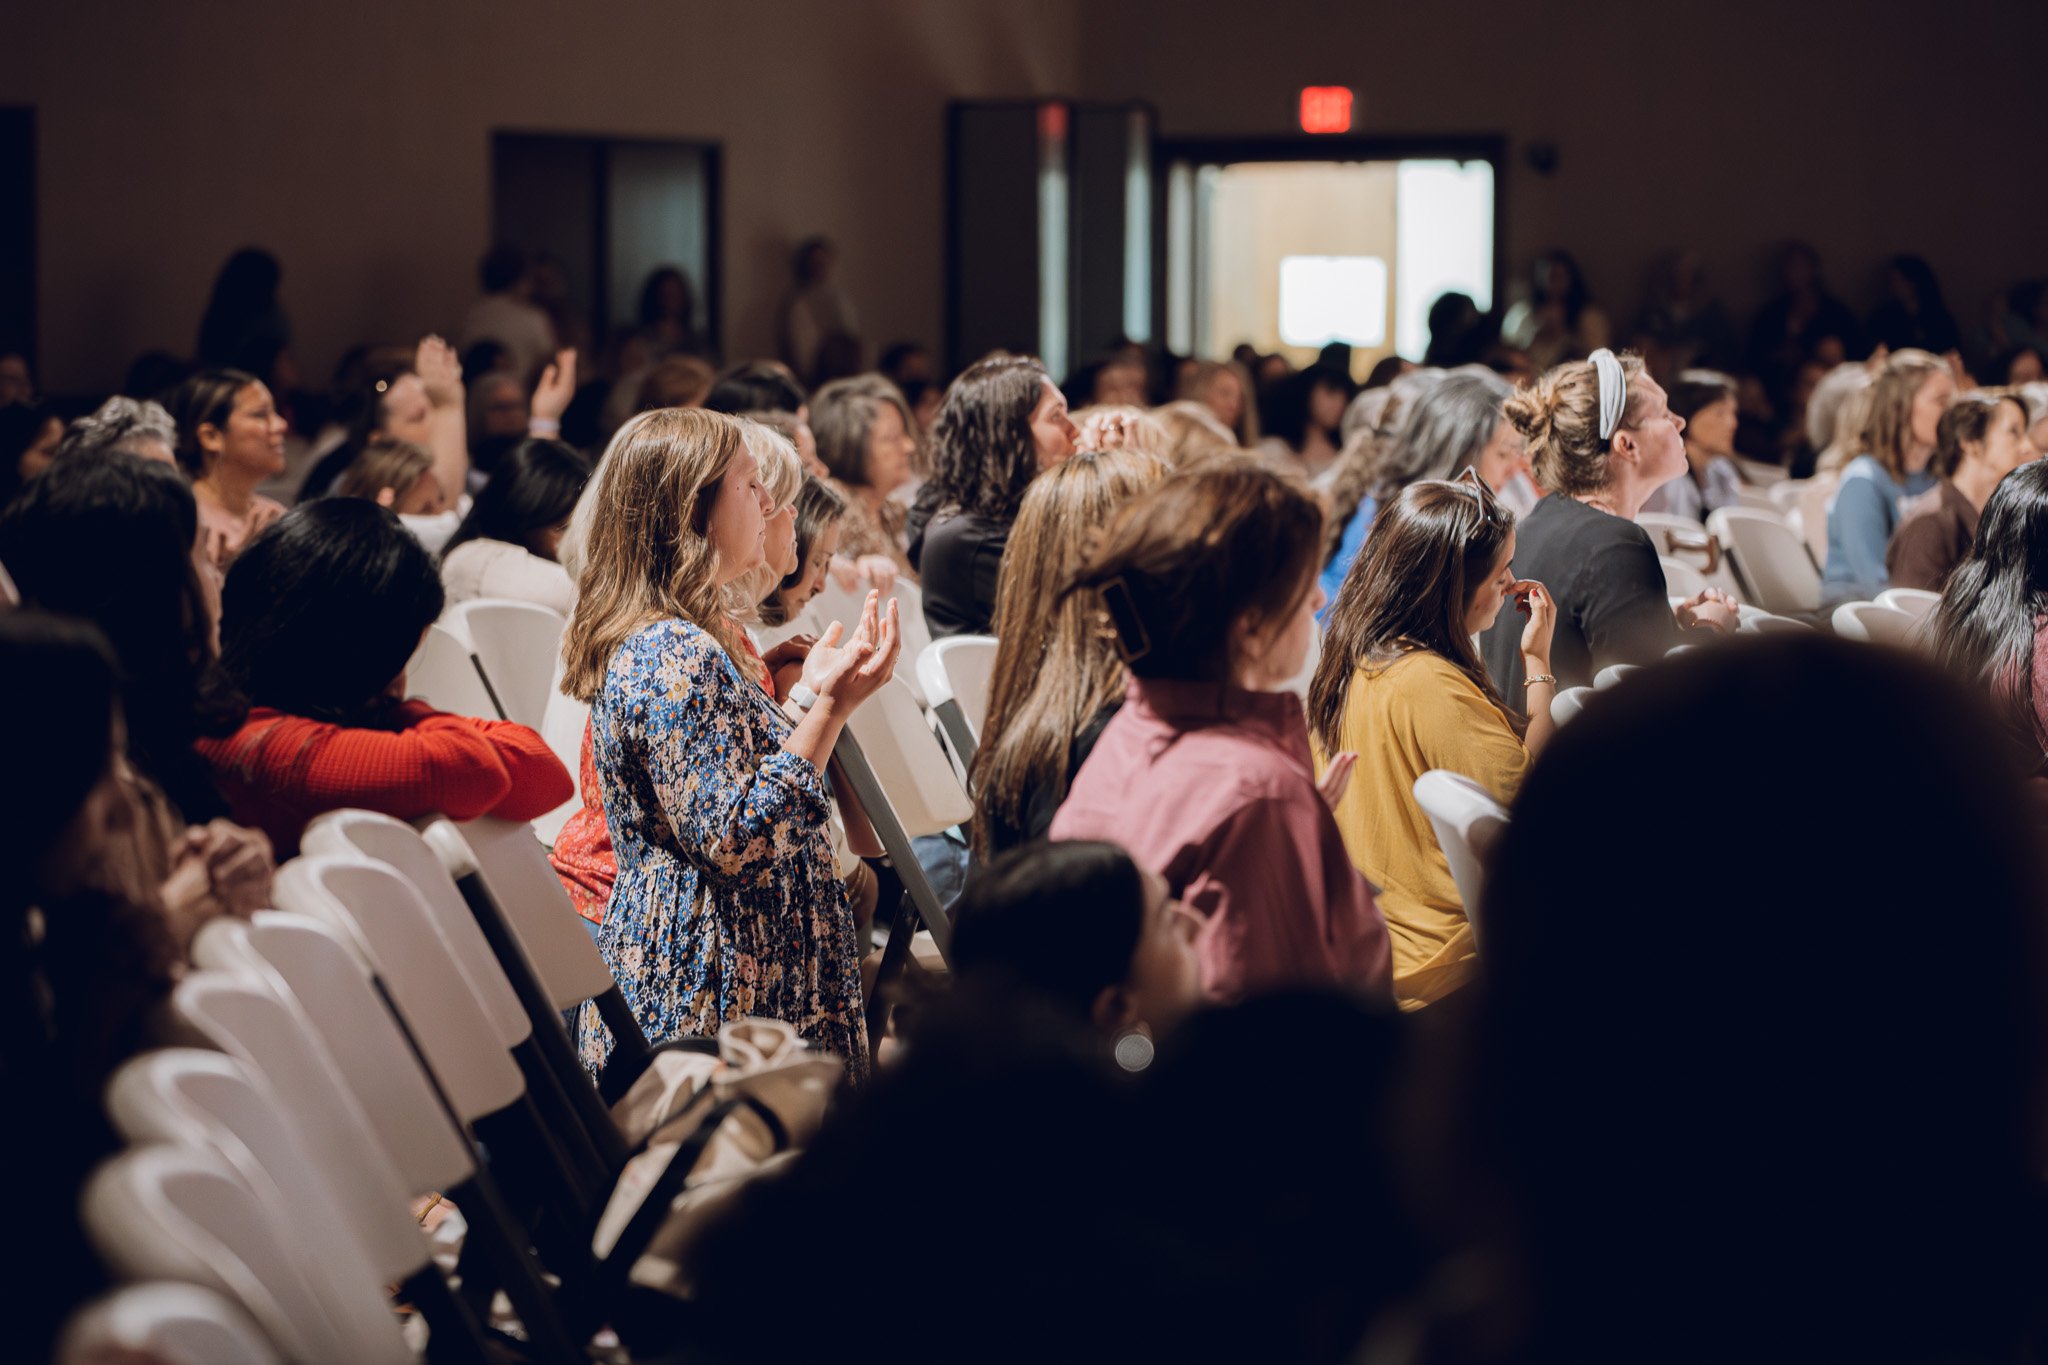 Hey ladies! It's been a little over a week since Women's Summit and we want to follow up to get you plugged in to the community! 

Here are a few ministries for different life stages that you can get plugged into!
@stannmoms - stannparish.org/moms
@s